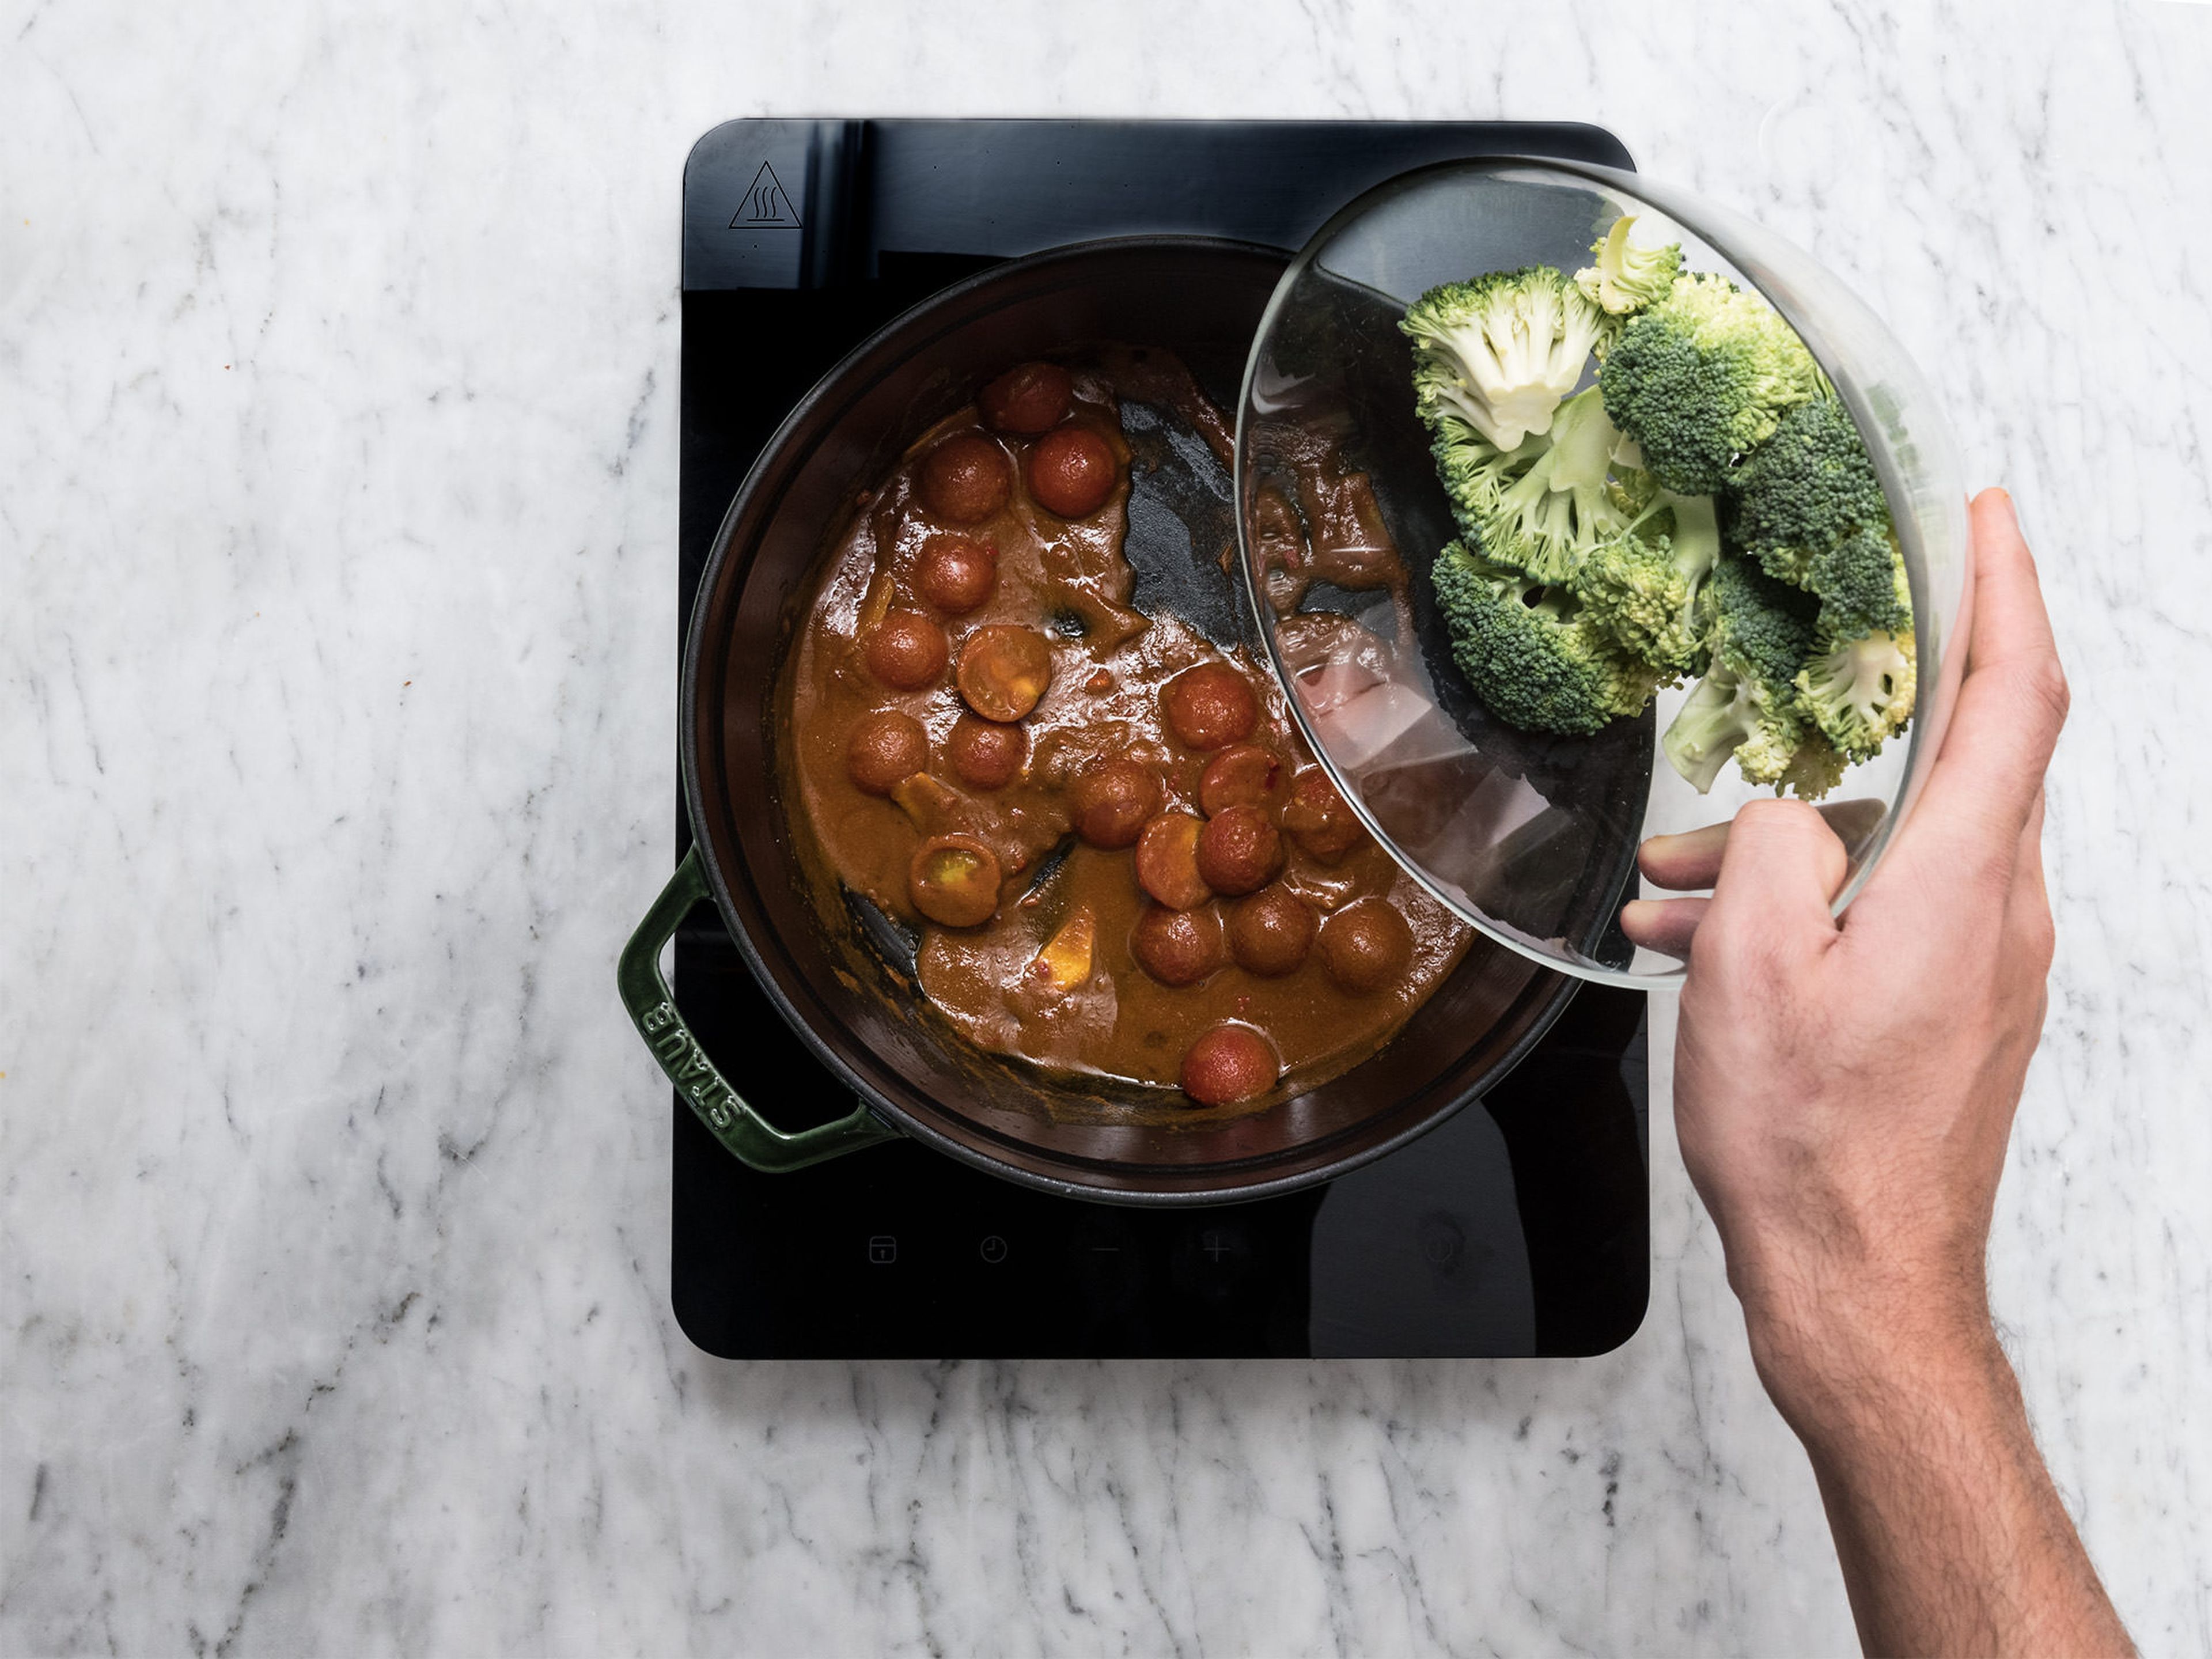 Add broccoli florets, bell pepper, zucchini, and carrots, and stir in the coconut milk and sour cream. Leave to simmer over medium heat for approx. 3 – 4 min., then add apple and sugar snap peas.